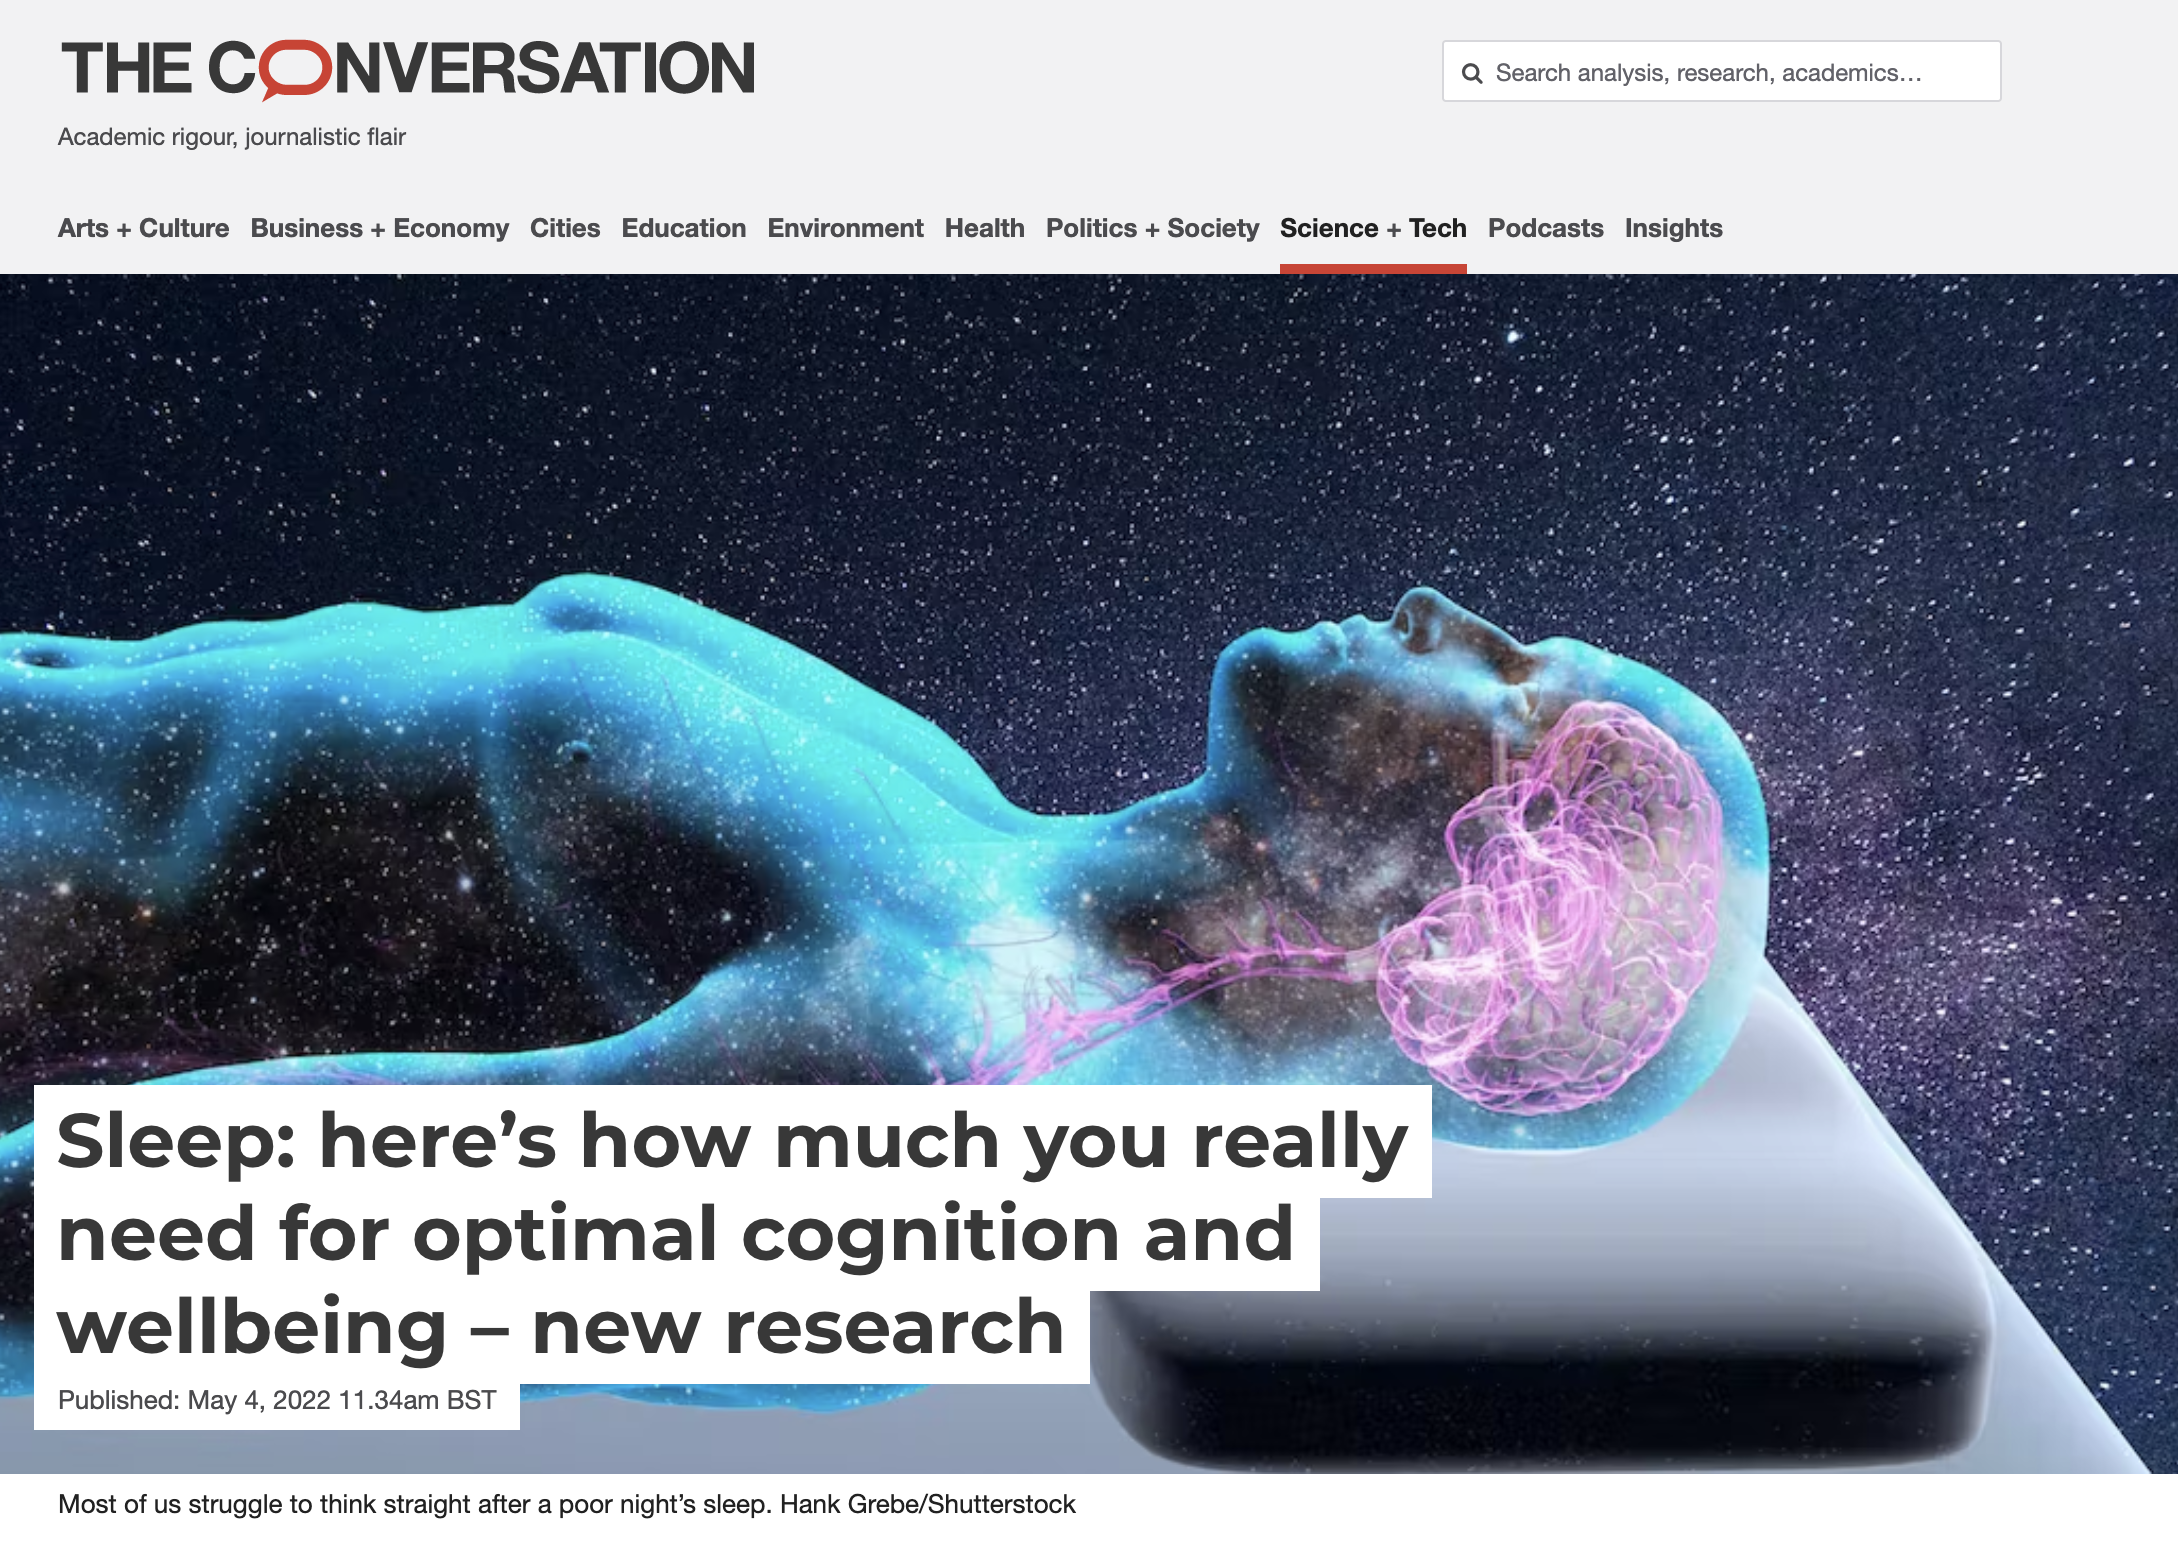 Article headline reads 'Sleep: here’s how much you really need for optimal cognition and wellbeing – new research'